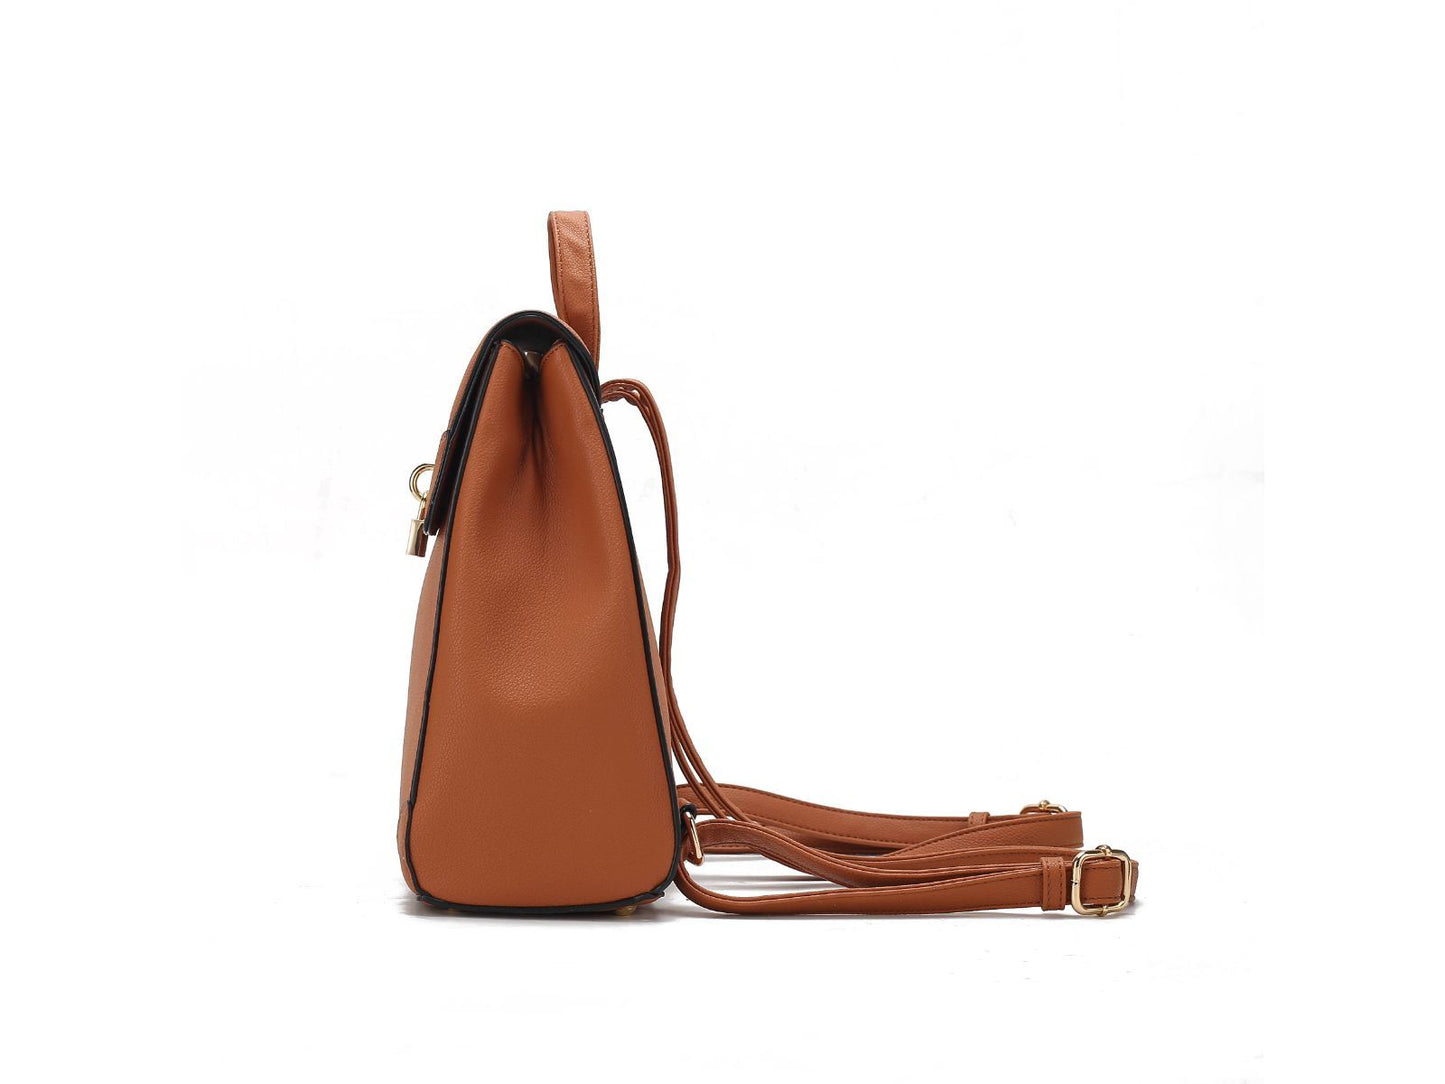 MKF Collection Sansa Vegan Leather Women's Backpack by Mia k